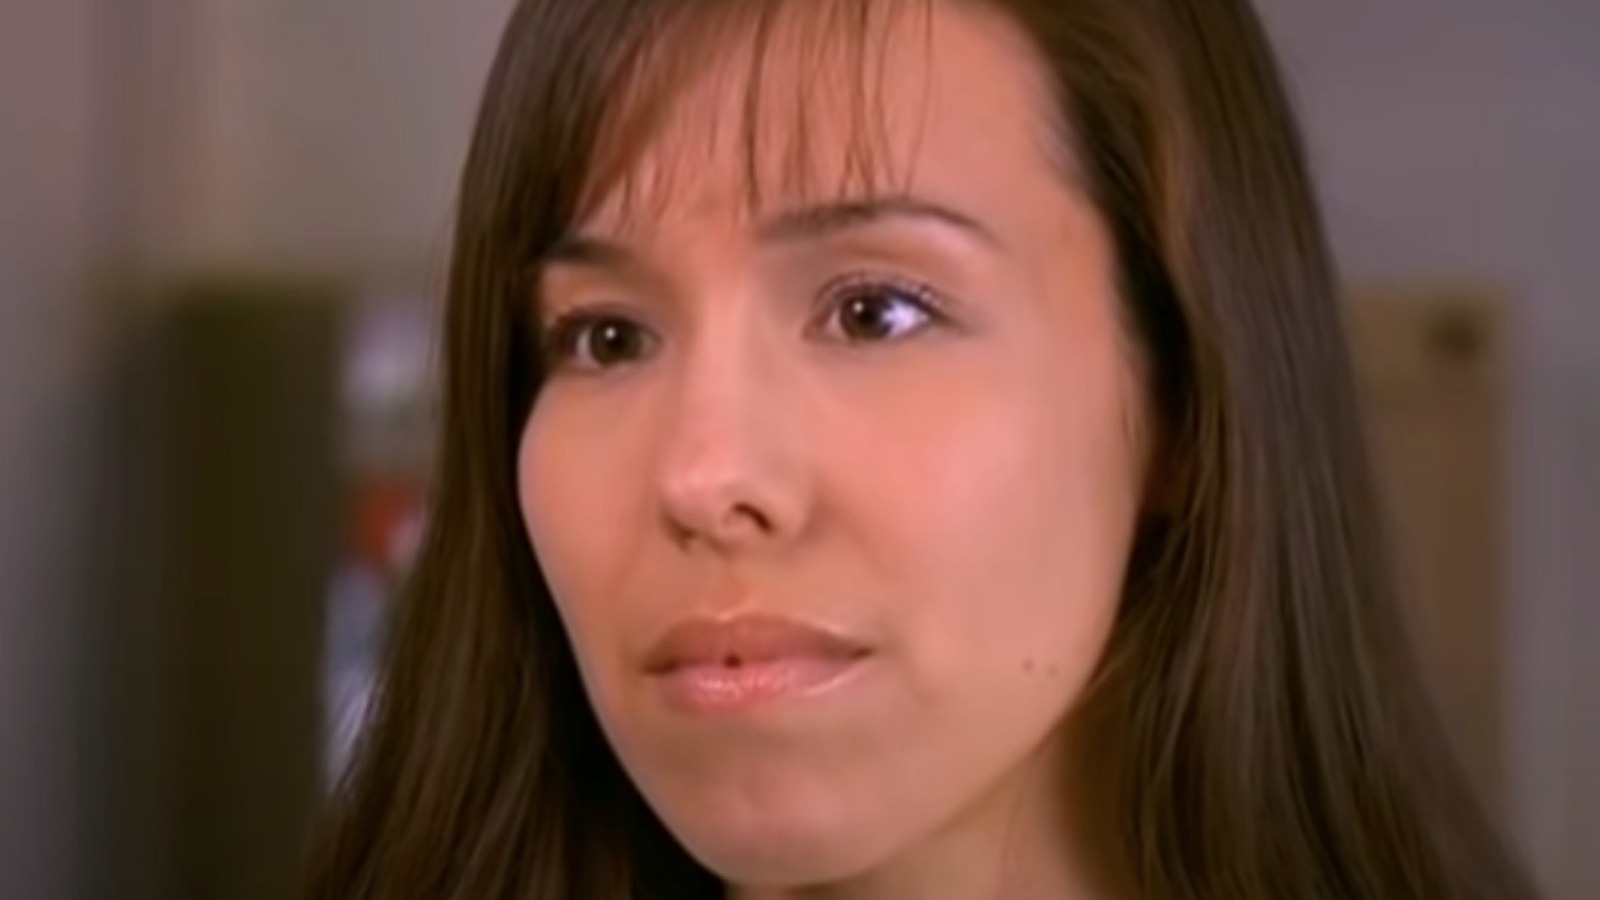  Why The Detective Who Arrested Jodi Arias Called Her Case A Travesty 